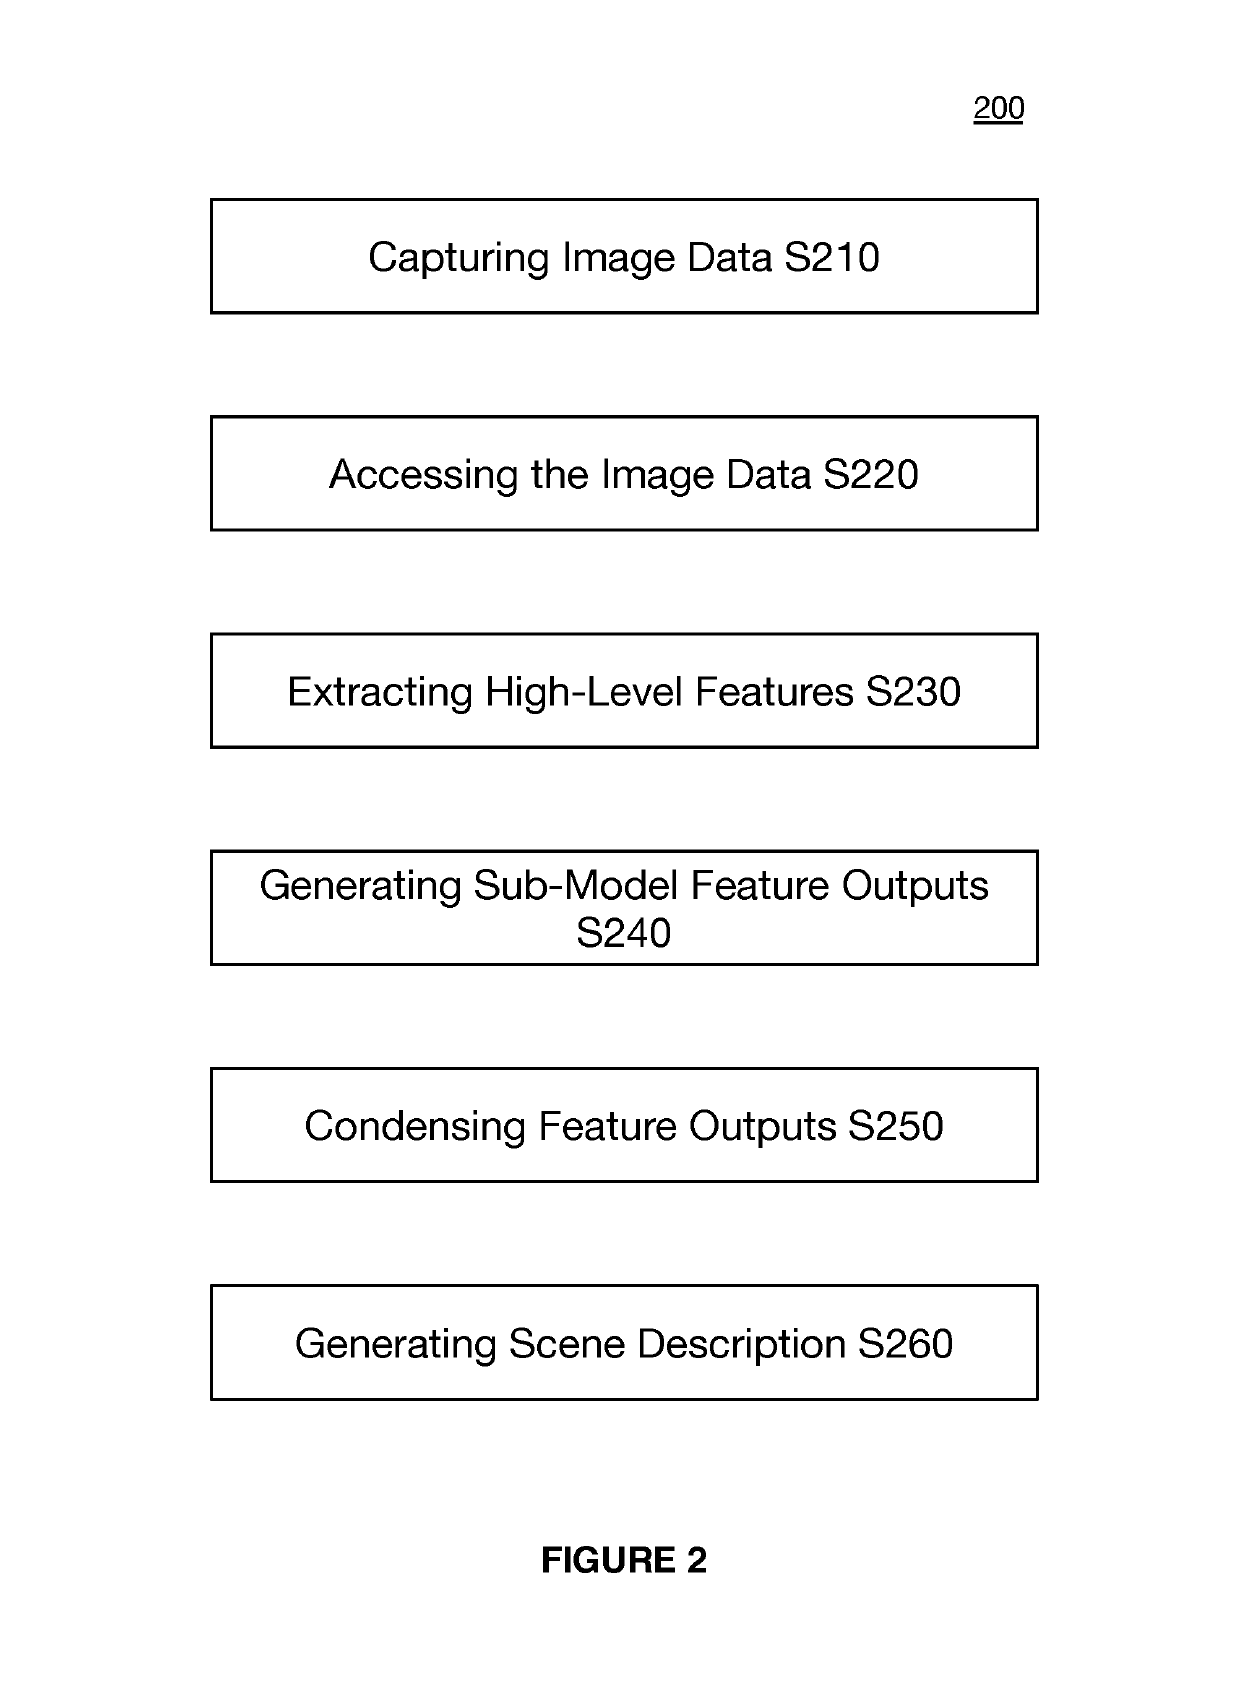 Systems and methods for intelligent and interpretive analysis of video image data using machine learning